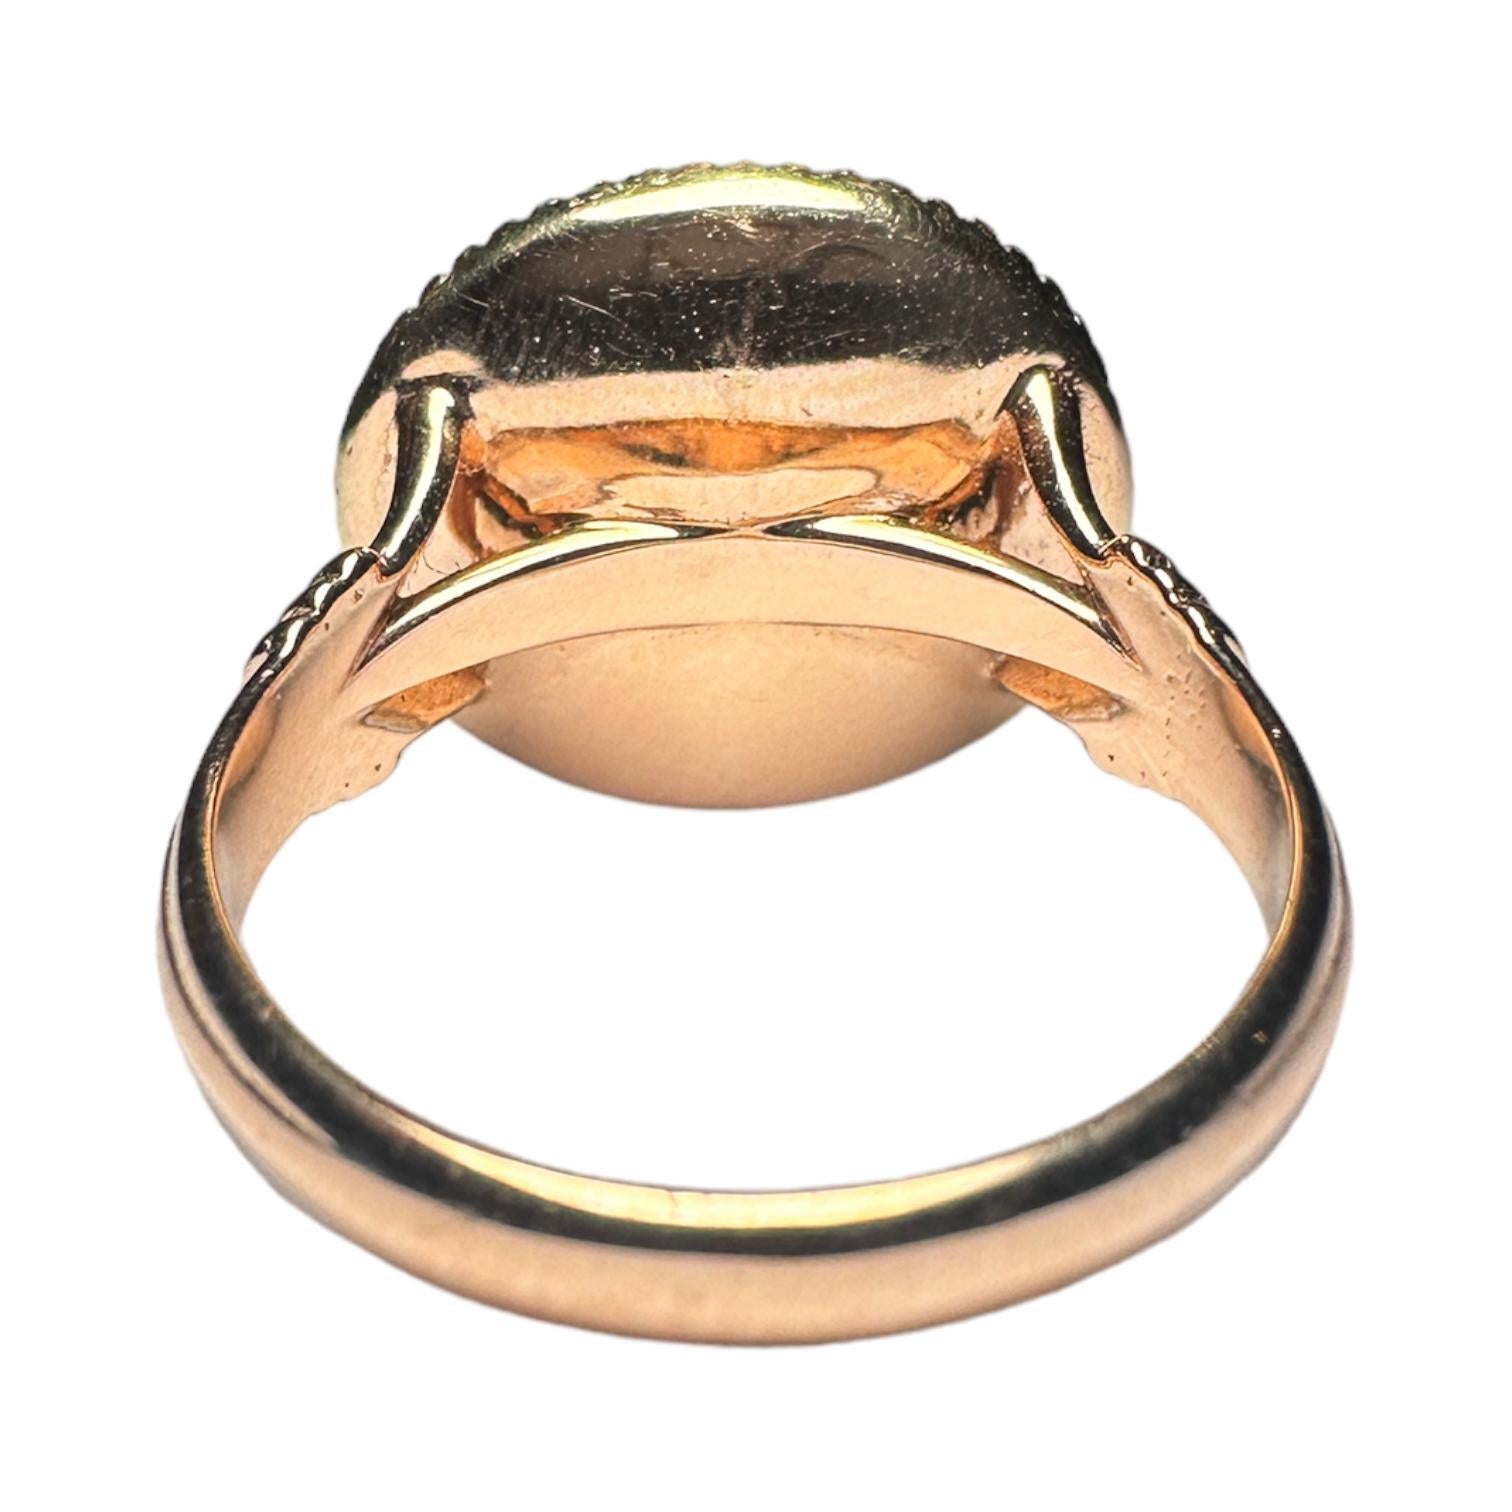 18K Gold Roman Intaglio Ring with Bull Signet For Sale 4